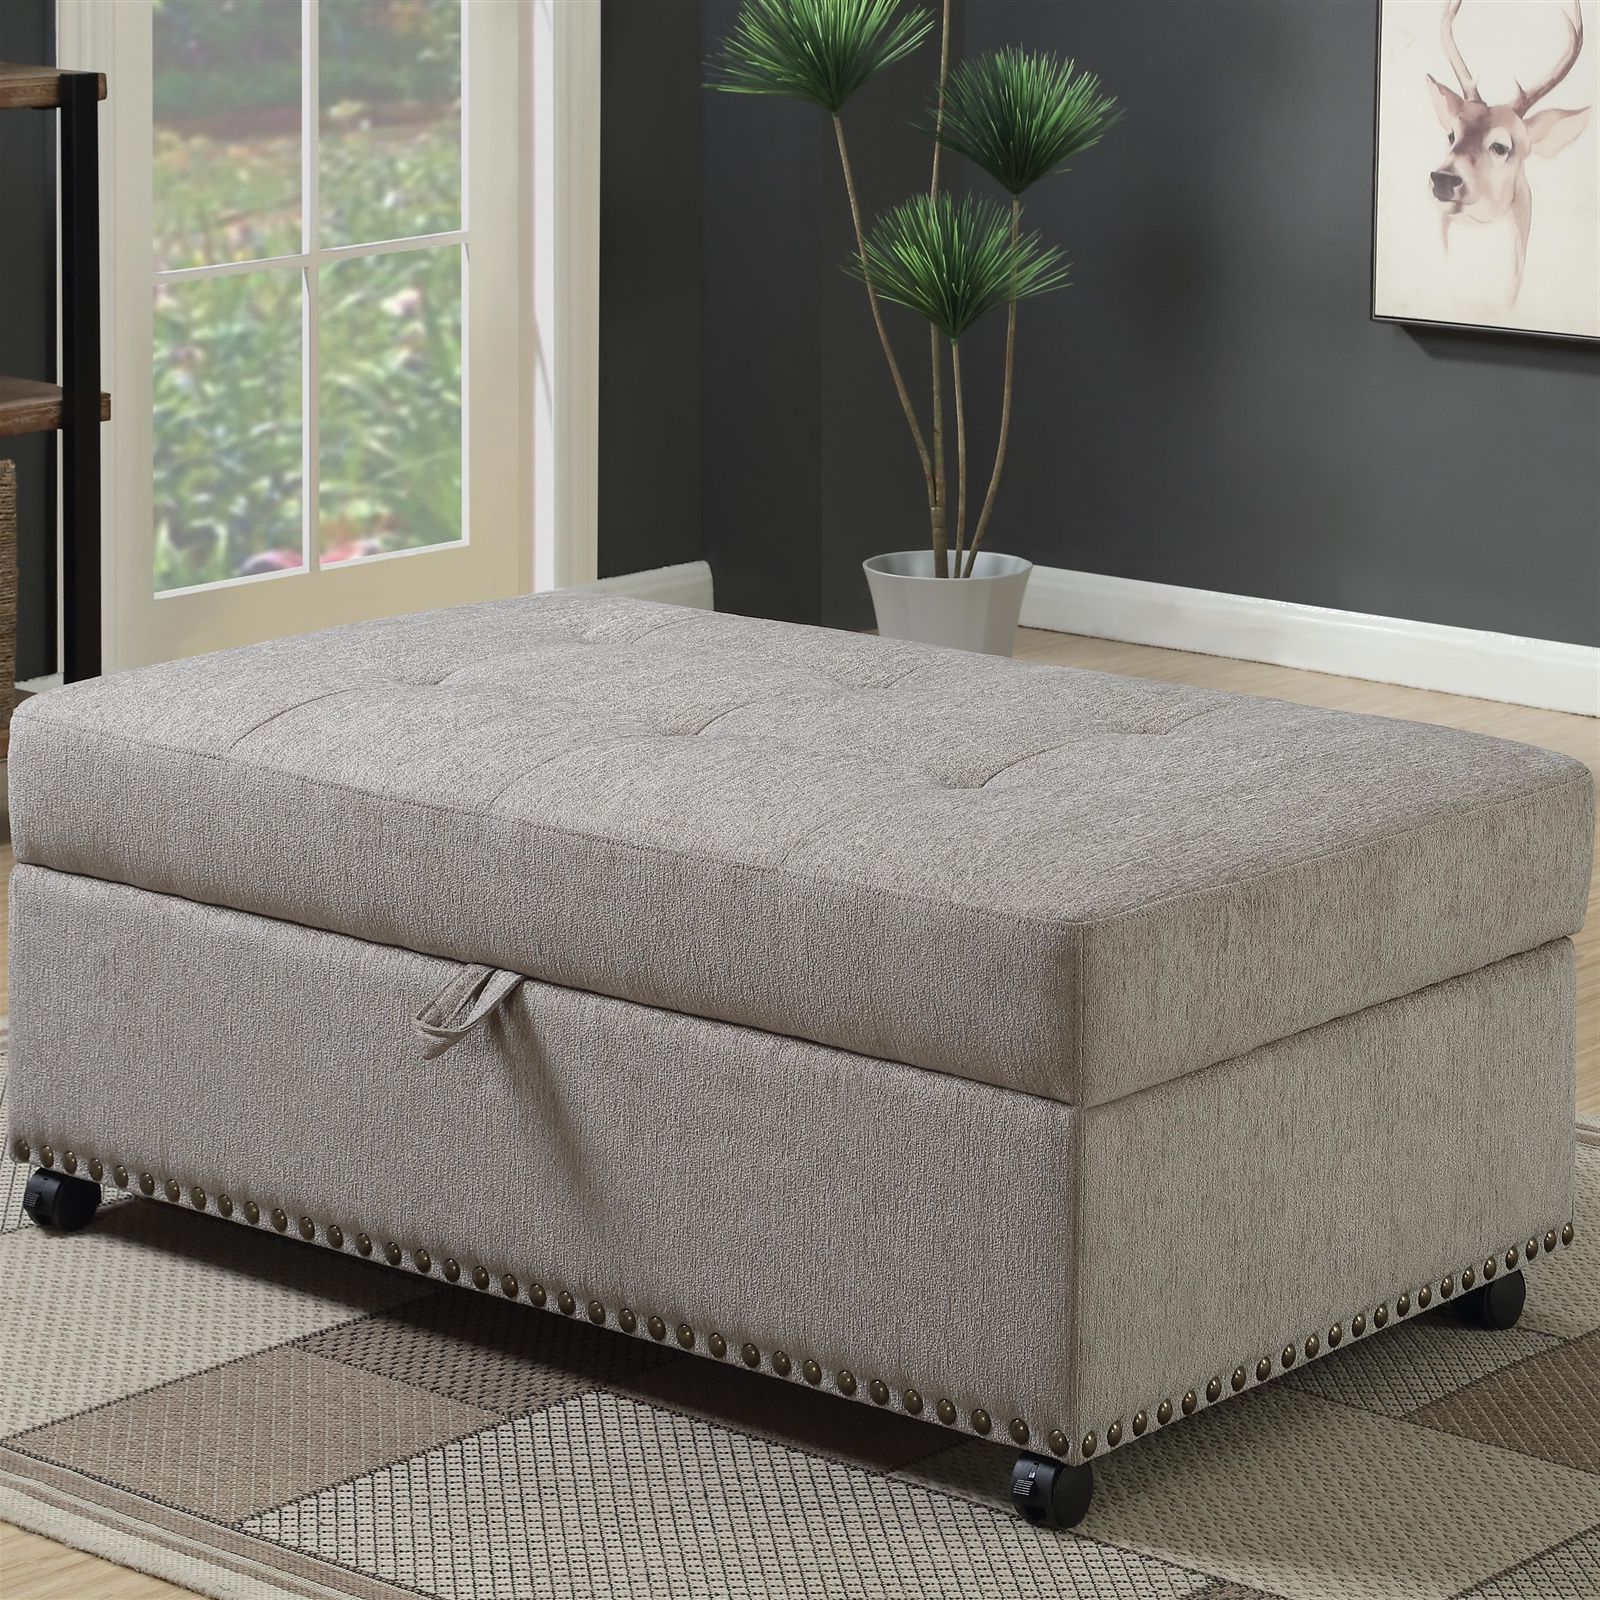 Light Gray Fold Out Sleeper Ottomans In Most Up To Date Ottoman W/ Pull Out Bed (View 7 of 10)